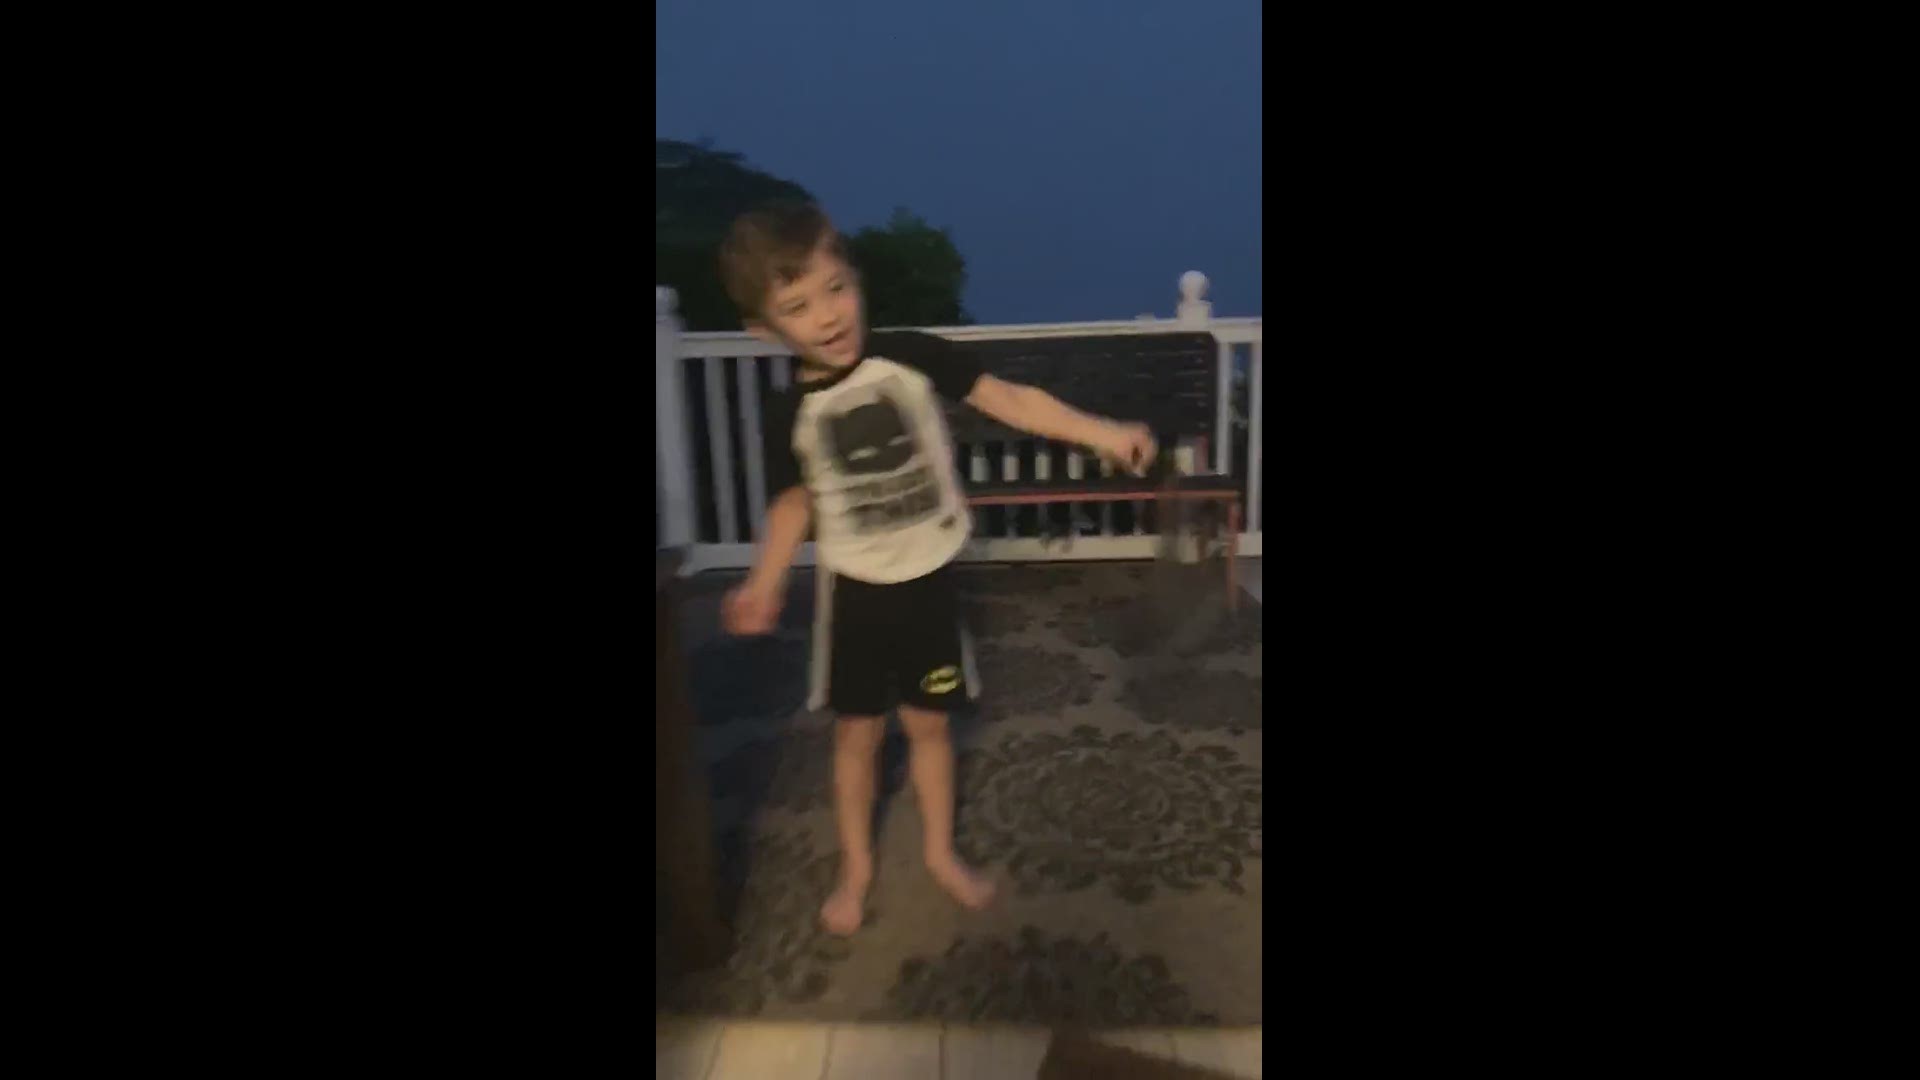 Storm approaches, my son Nolan playing with his Thor hammer, holding it to the sky as the lightning strikes!
Credit: Darla Salchenberg